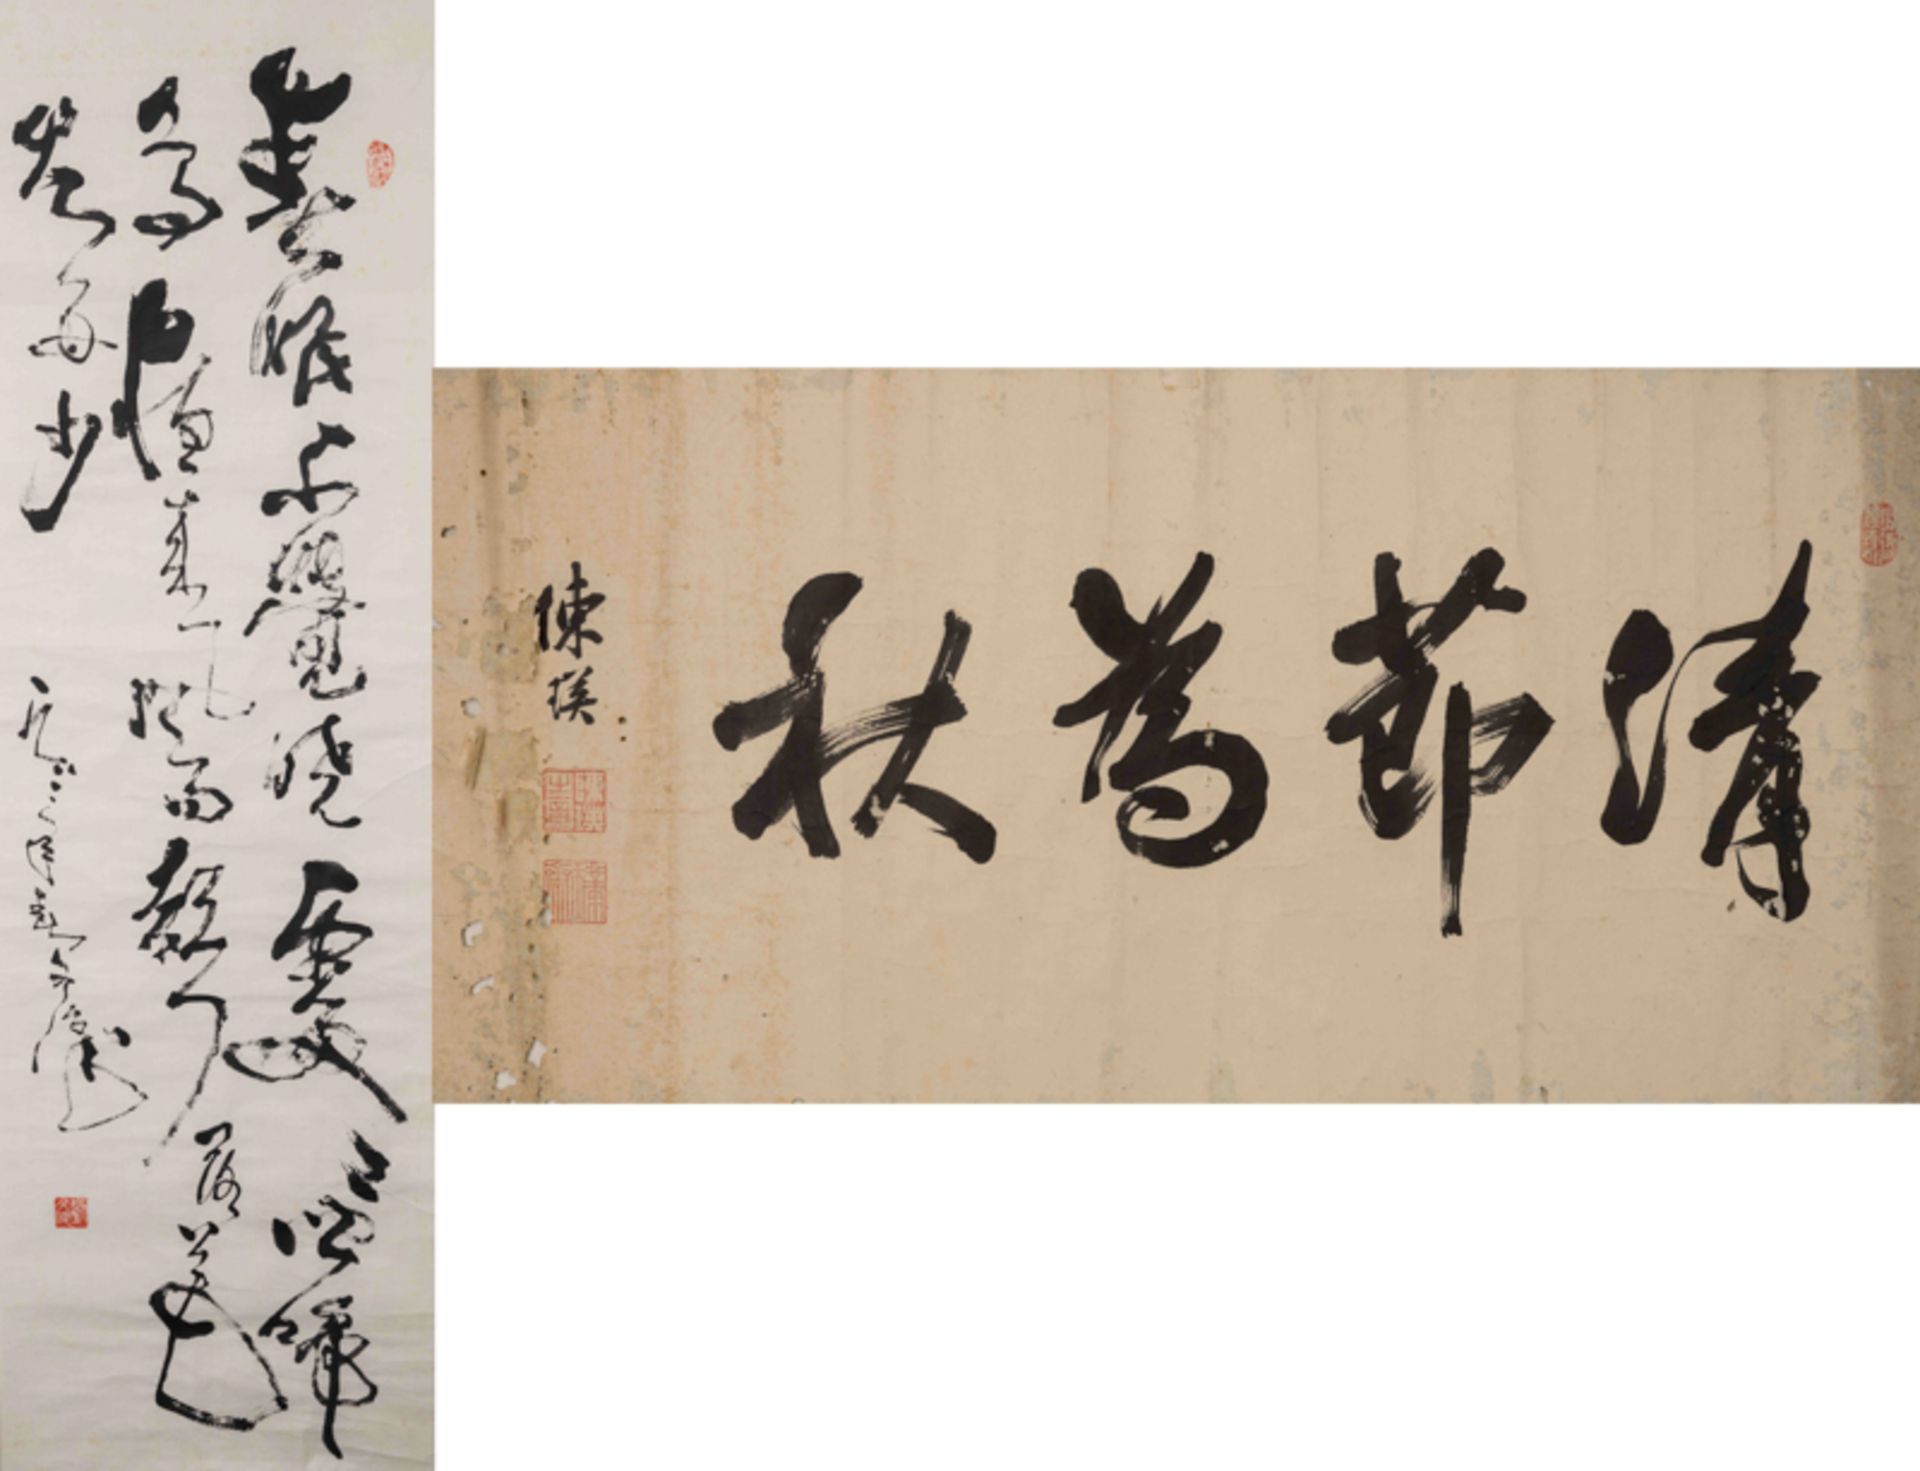 TWO CALLIGRAPHIES 書法2點